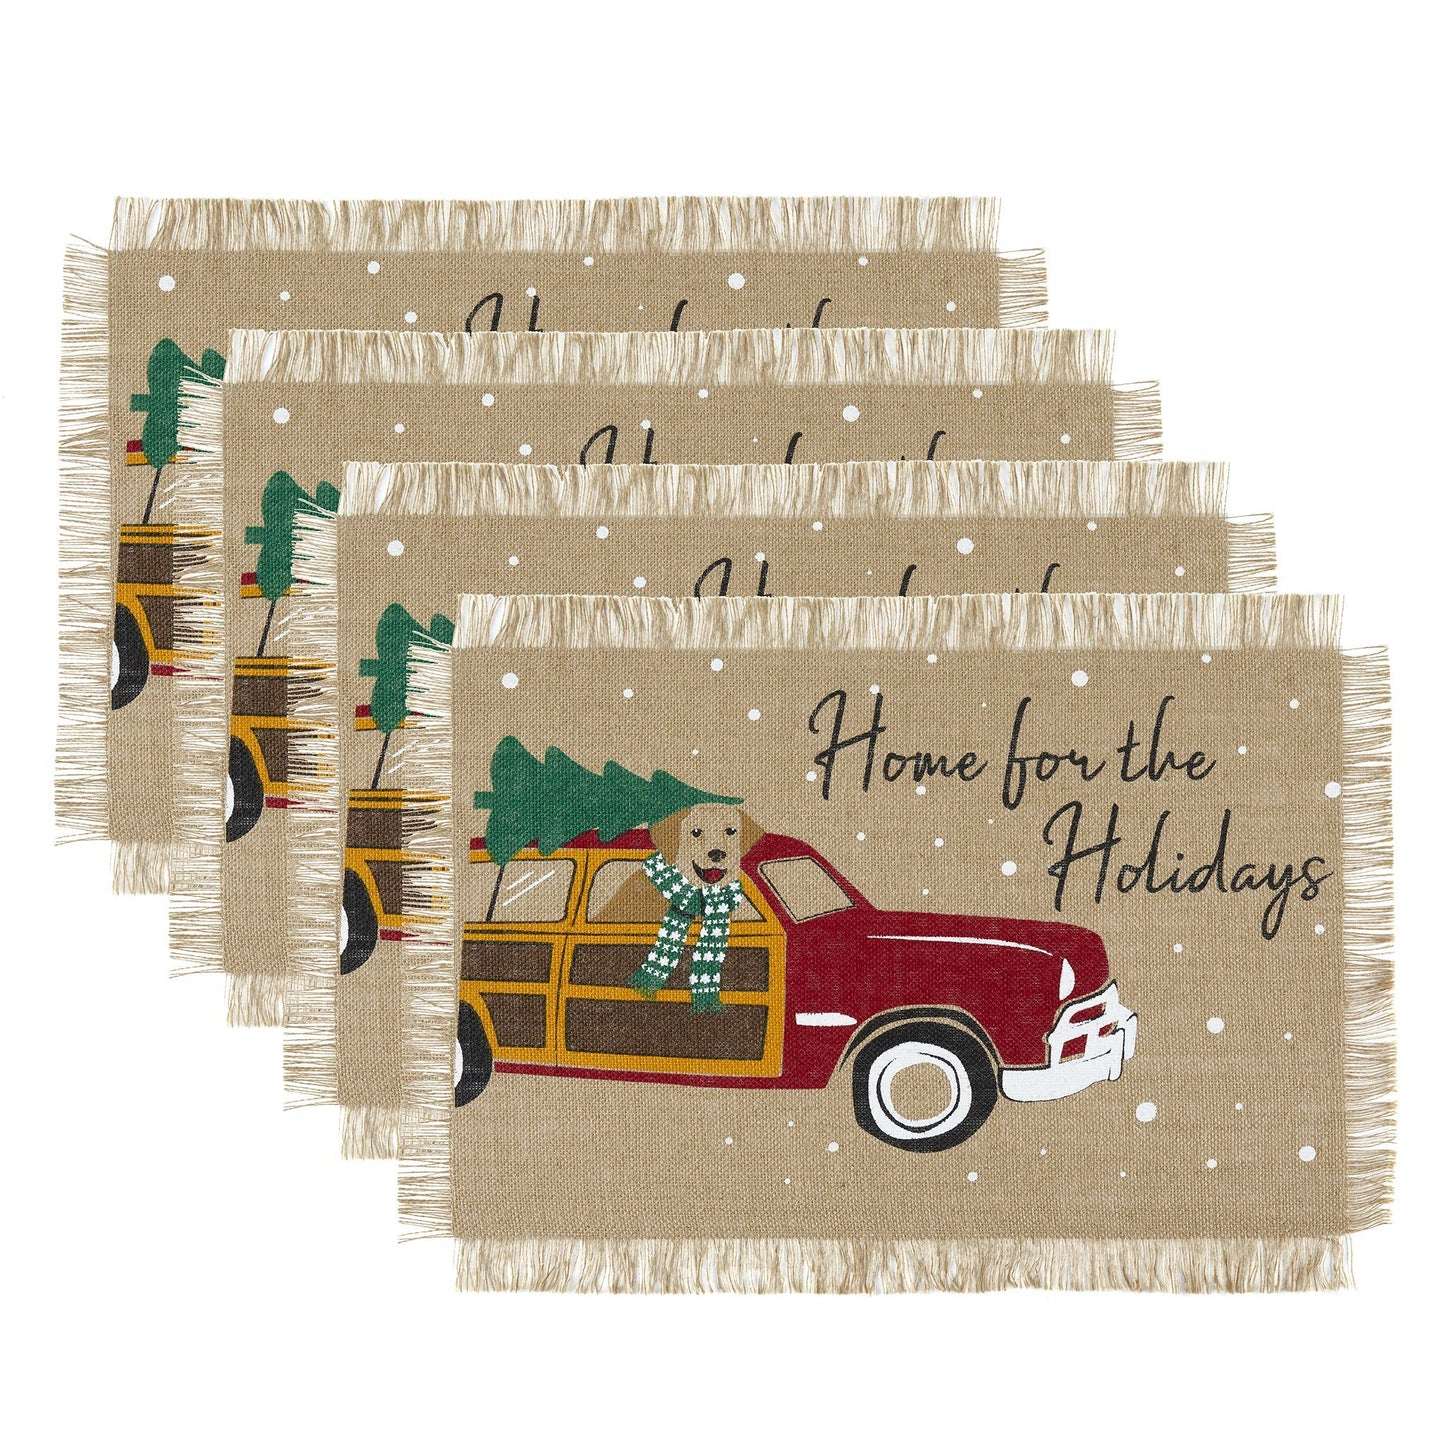 Home For the Holidays Burlap Placemat, Set of 4